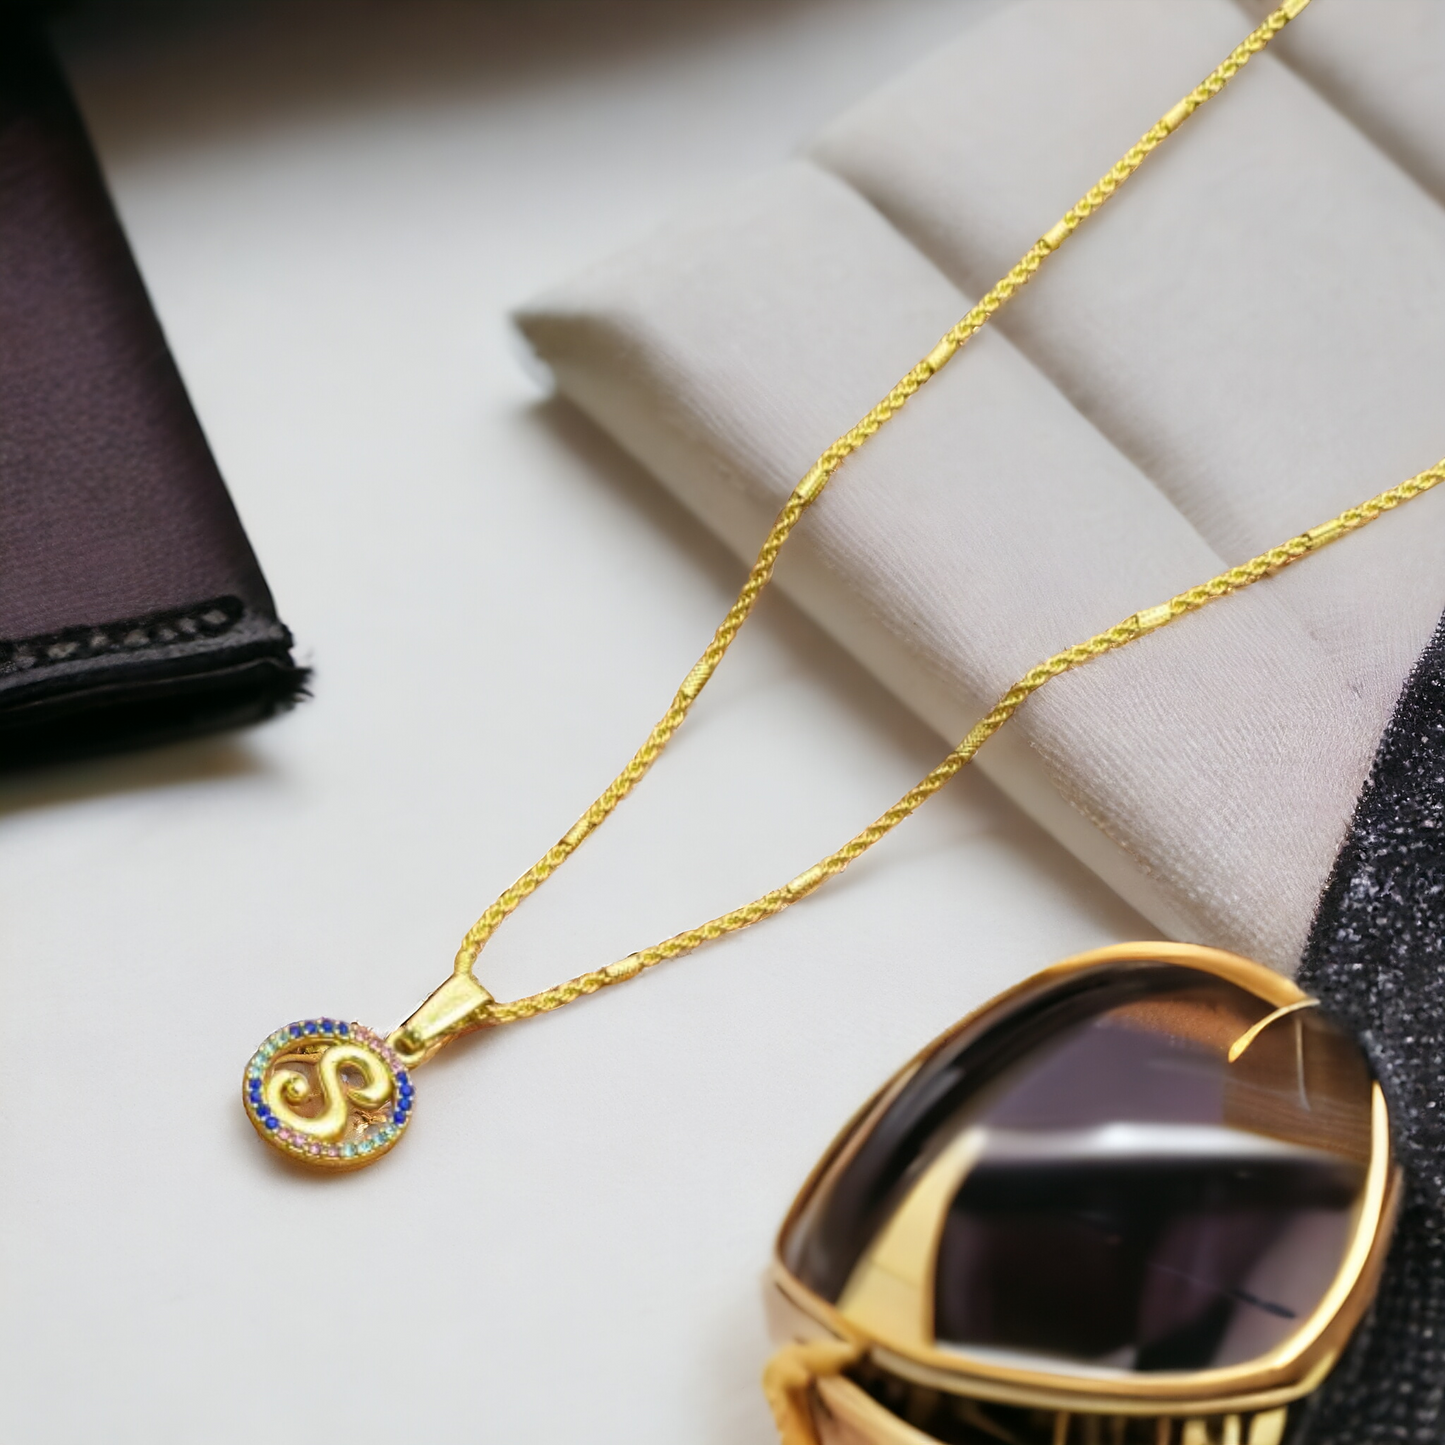 'S' Letter Gold Plated Necklace: Perfect for Women & Girls' Daily Wear